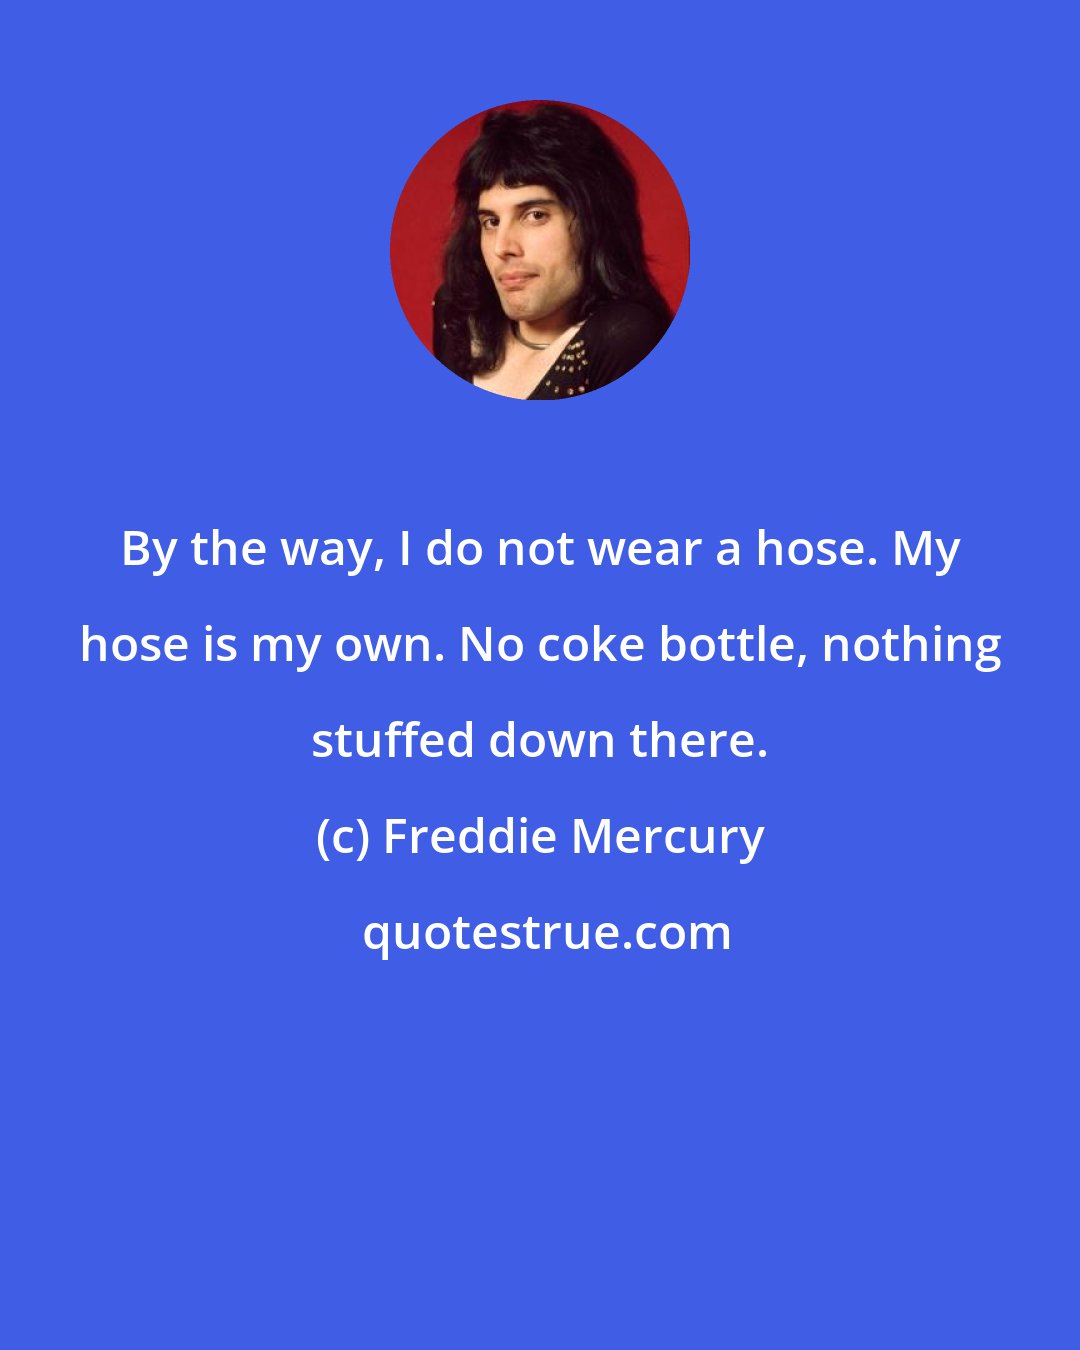 Freddie Mercury: By the way, I do not wear a hose. My hose is my own. No coke bottle, nothing stuffed down there.